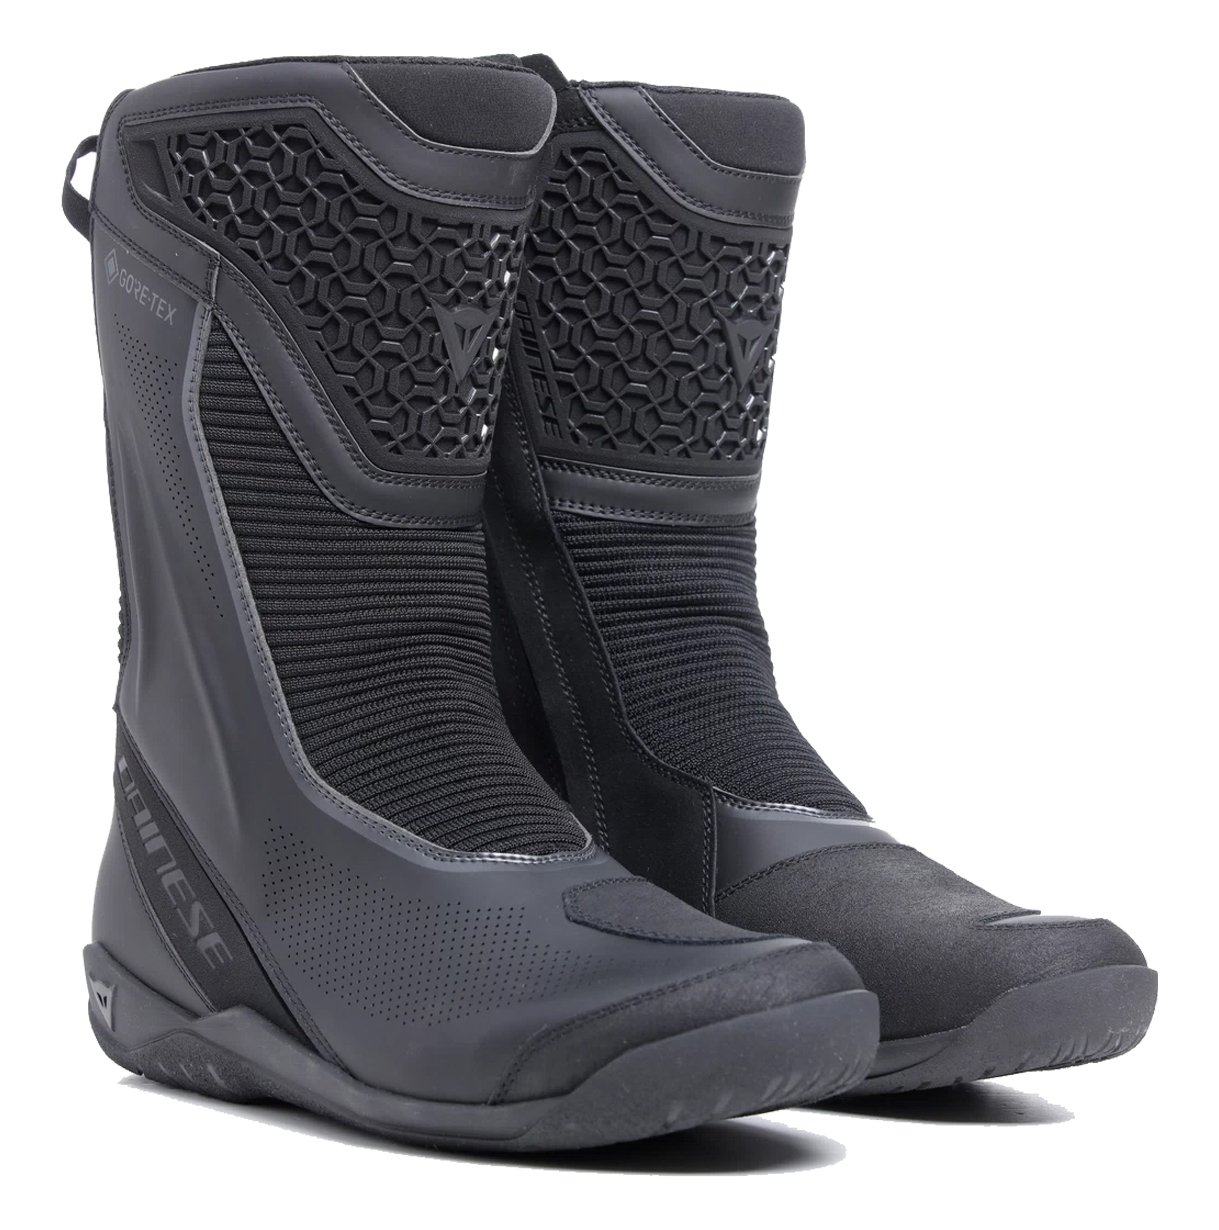 Image of Dainese Freeland 2 Gore-Tex Boots Black Size 49 EN